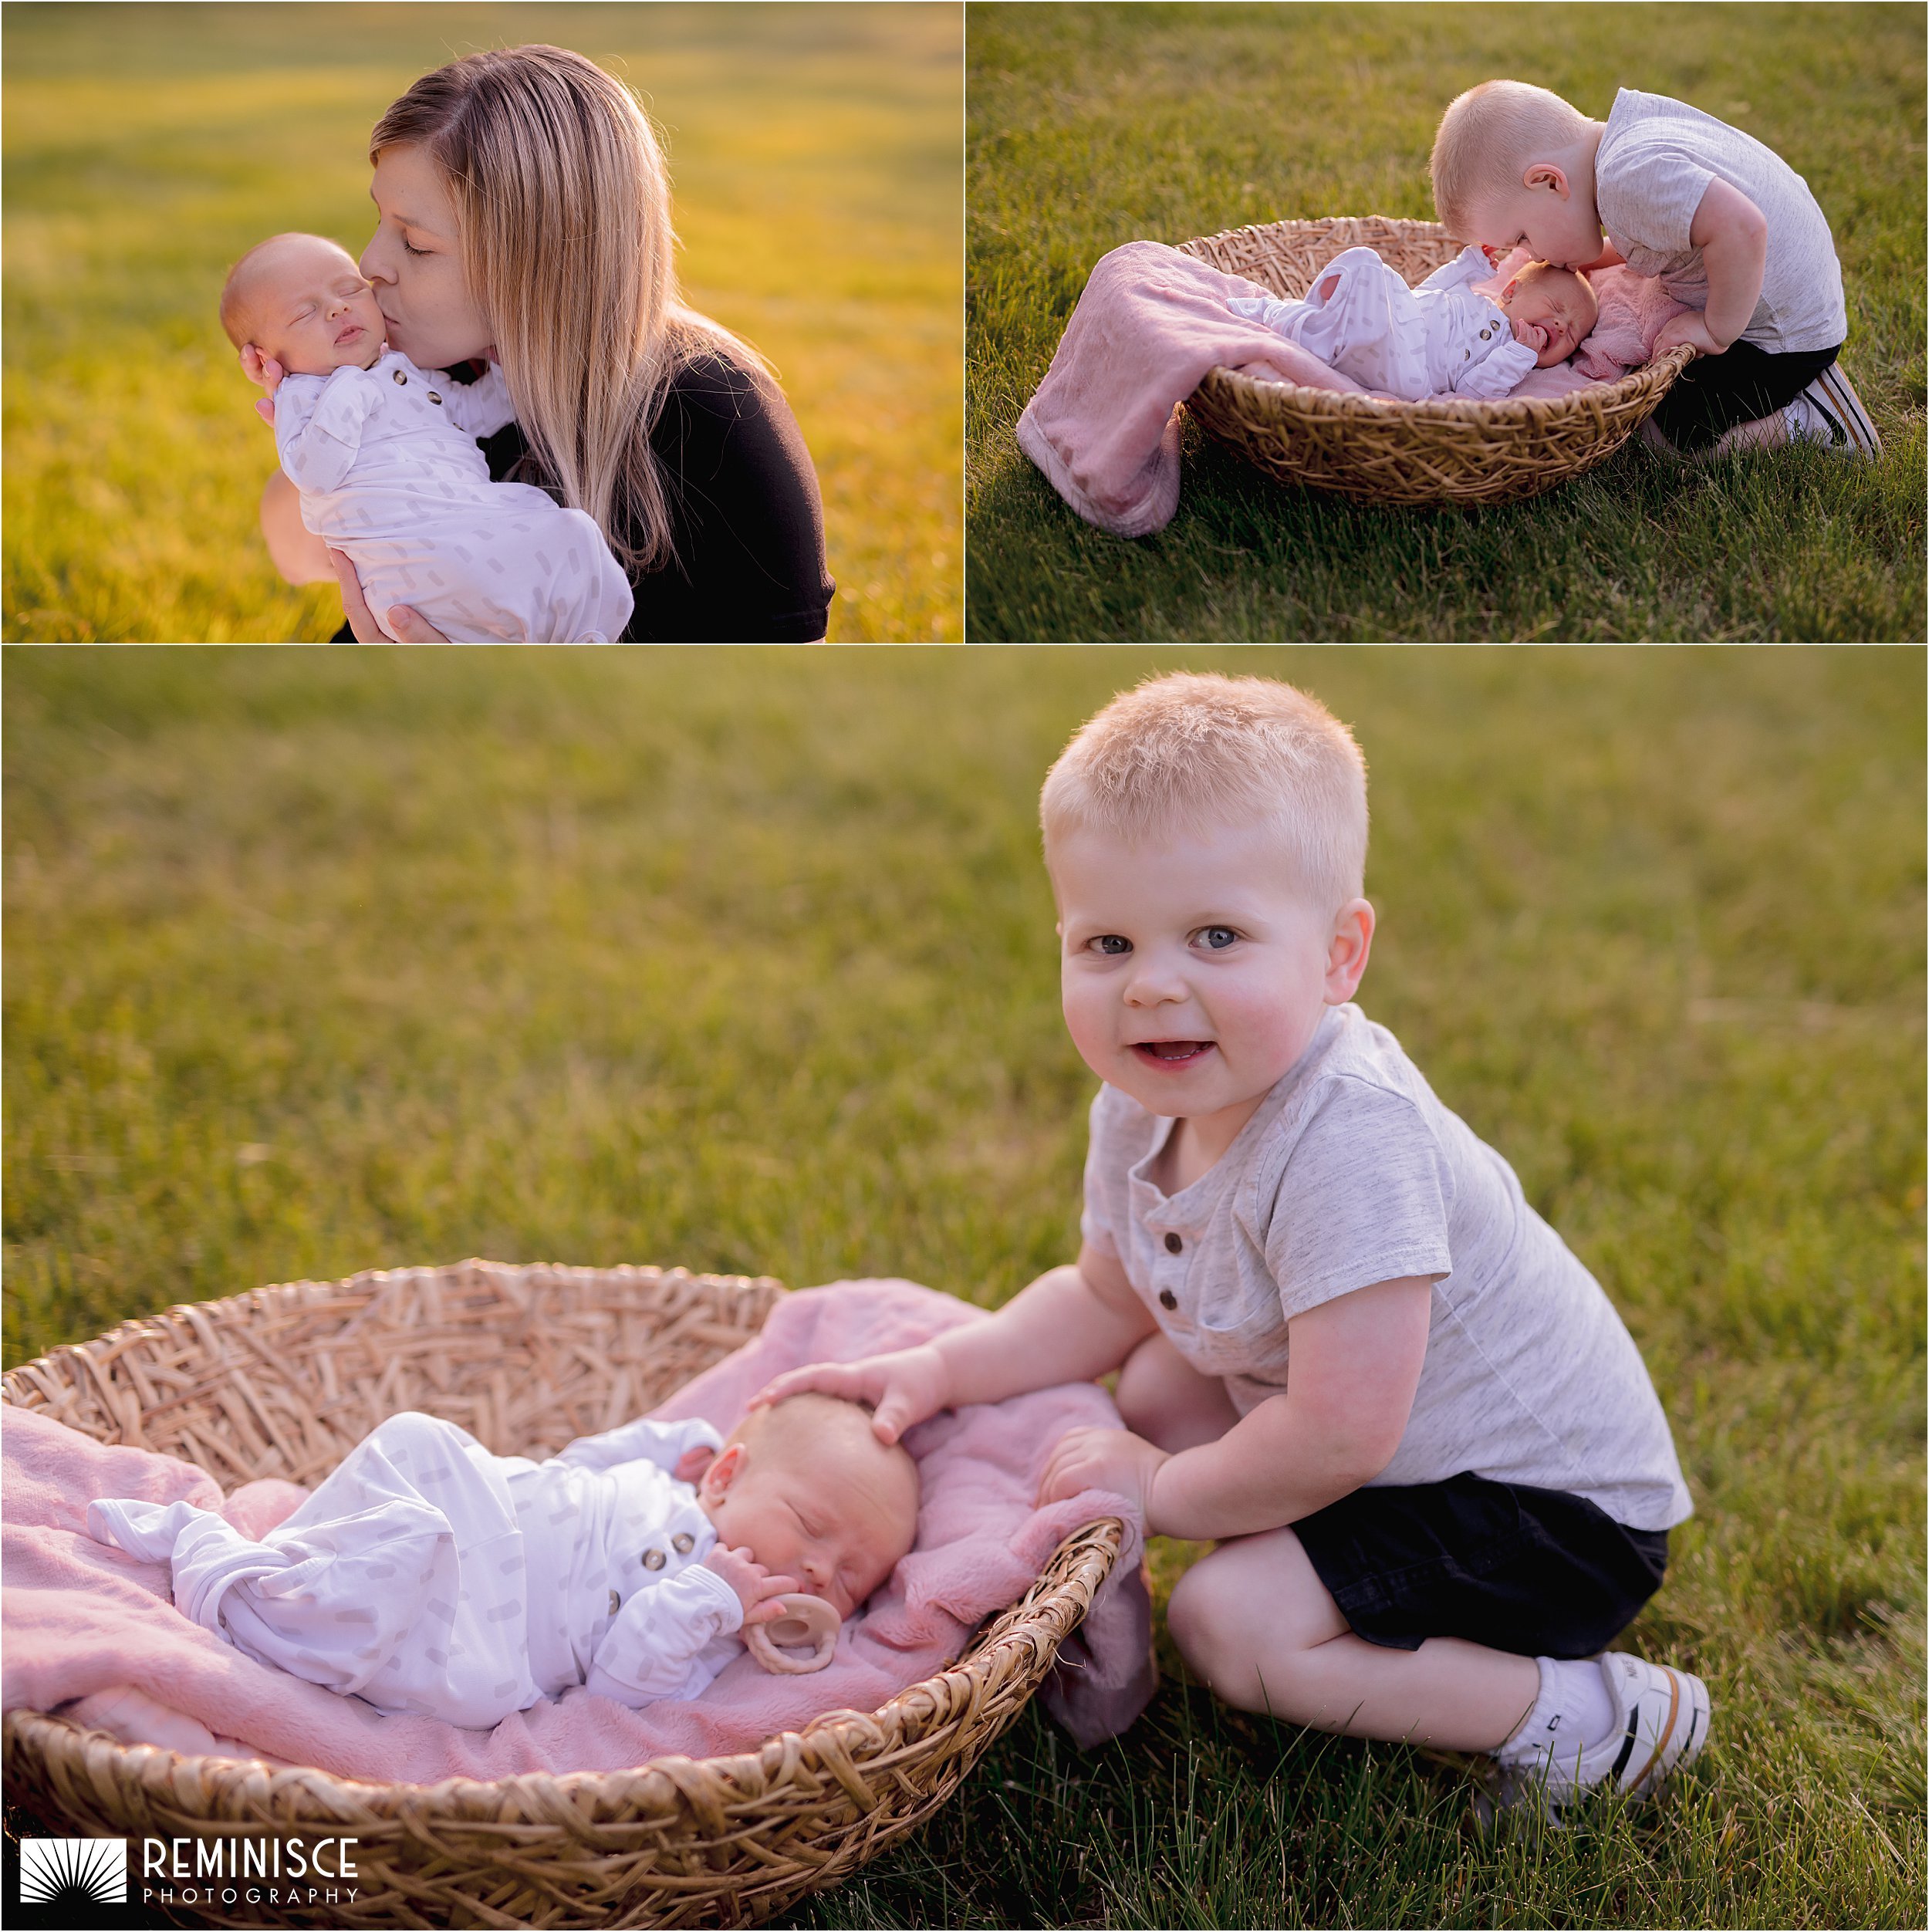 Best Milwaukee, Madison, and Chicago family portrait session photographer. Artistic and candid photography sessions featuring kids, newborns, and babies doing fun poses at their photoshoots.